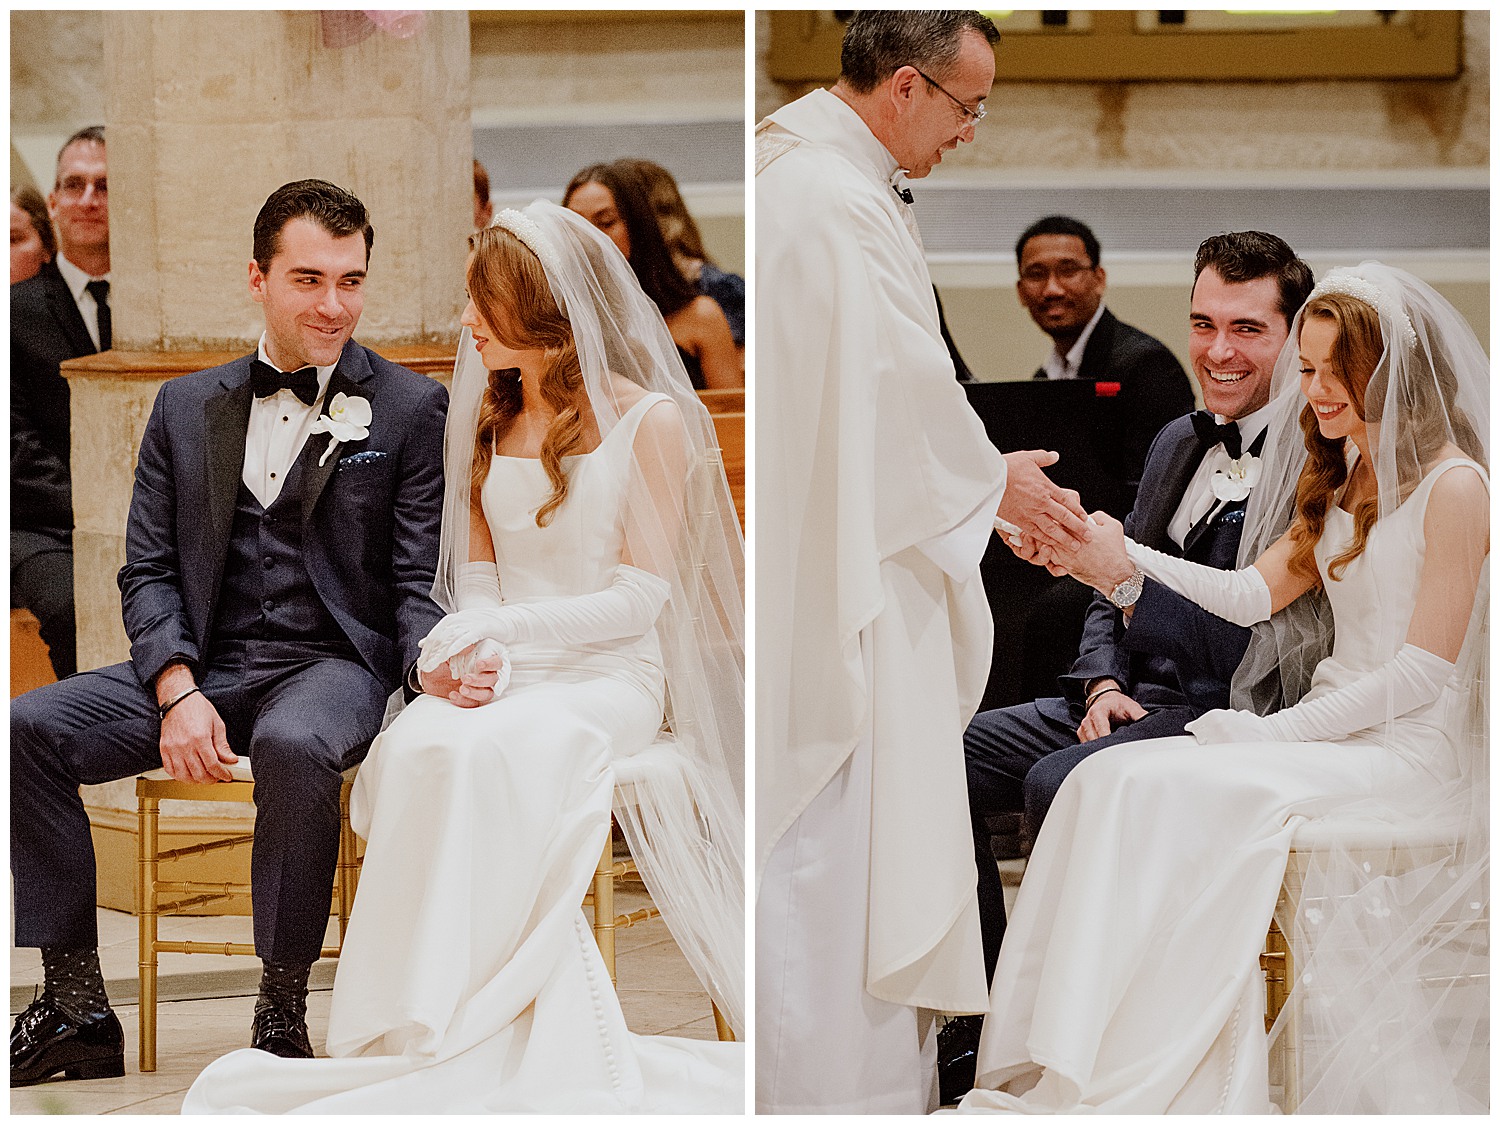 The couple share a light hearted moment with the priest during their wedding ceremony